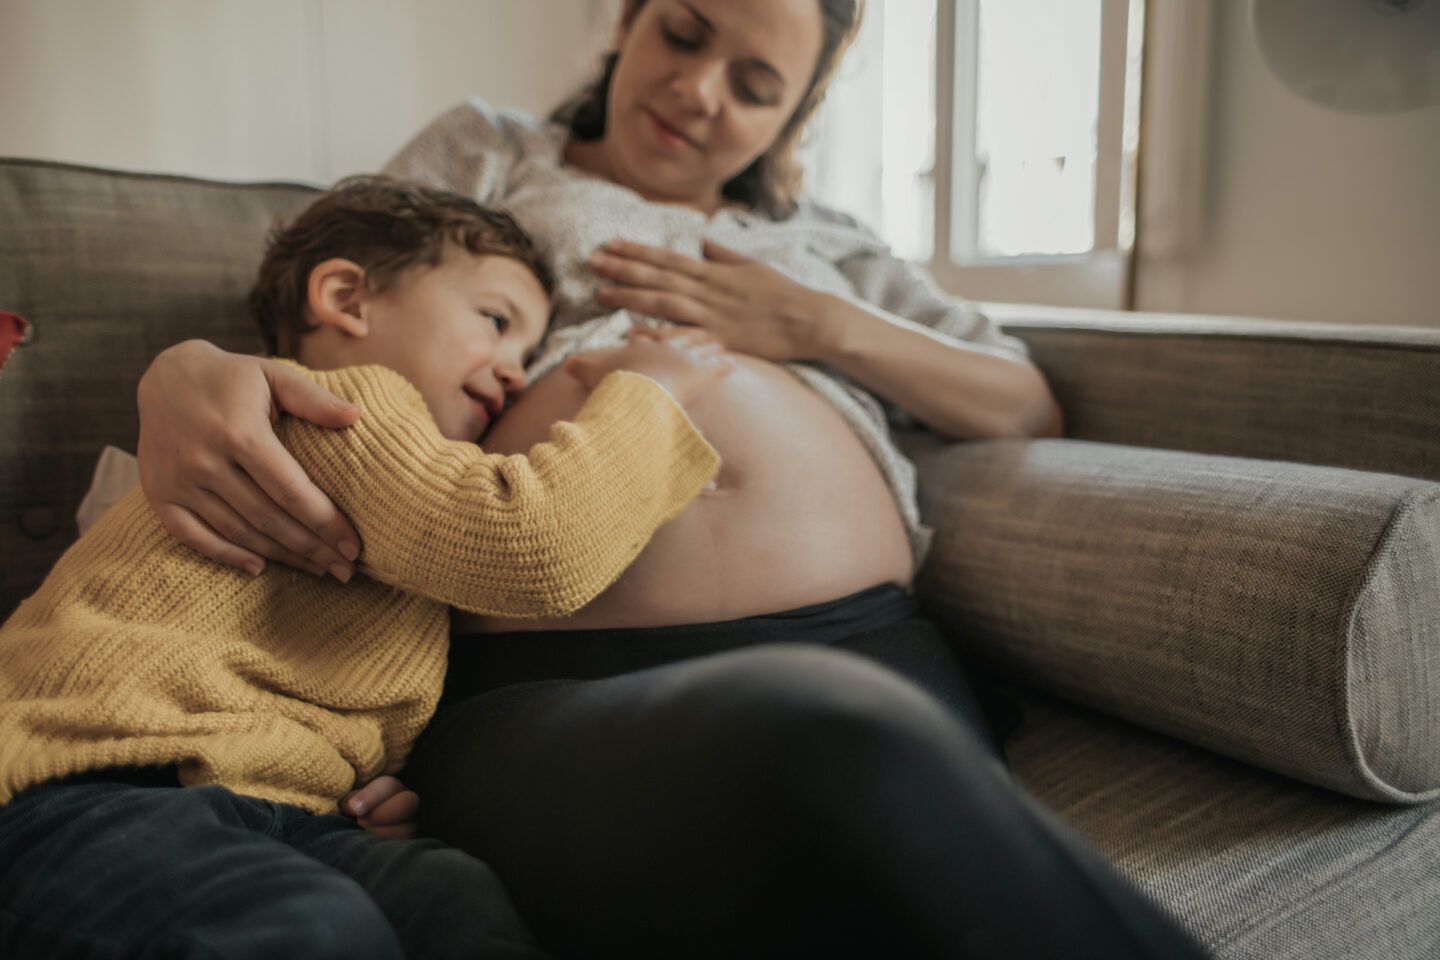 pregnancy ambivalence: boy touching his mother's pregnant belly